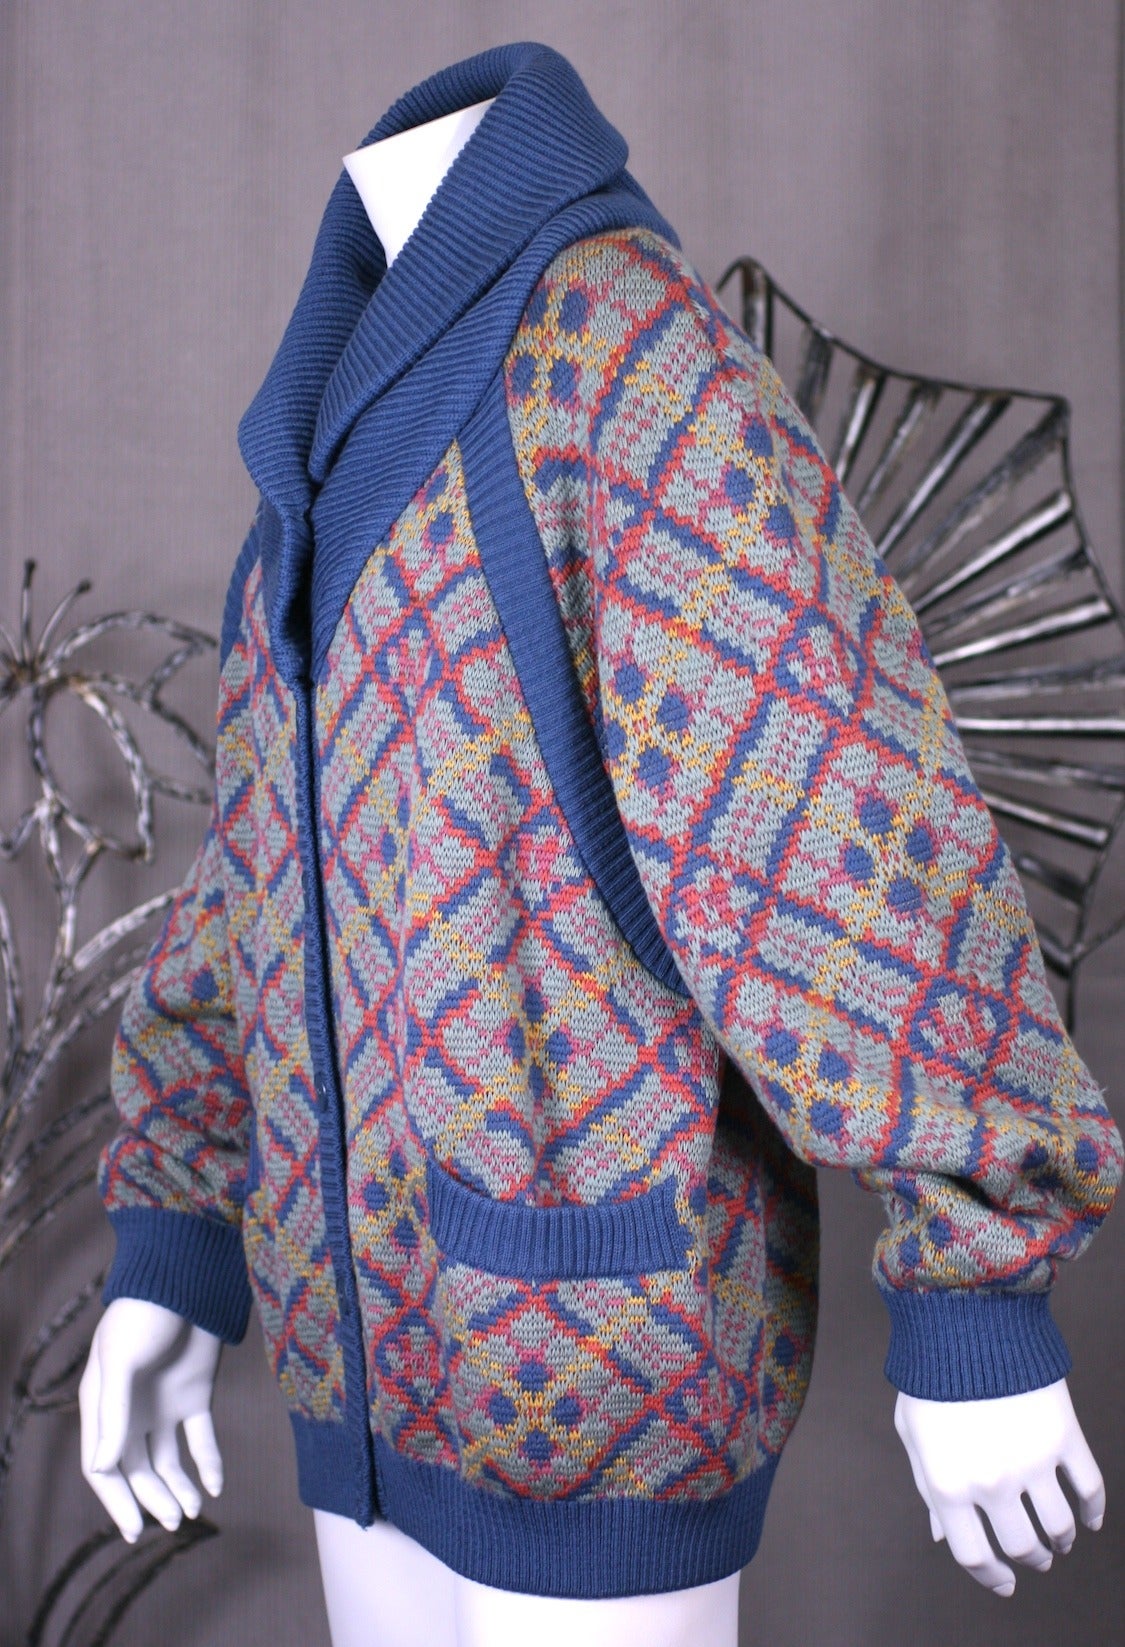 YSL Rive Gauche wool argyle intarsia knit cardigan inserted with slate blue ribbed knitted bands and pockets. There is a blue ribbed knitted shawl collar, placket and deep raglan sleeves. 1980's France. Excellent condition. 
Length 27